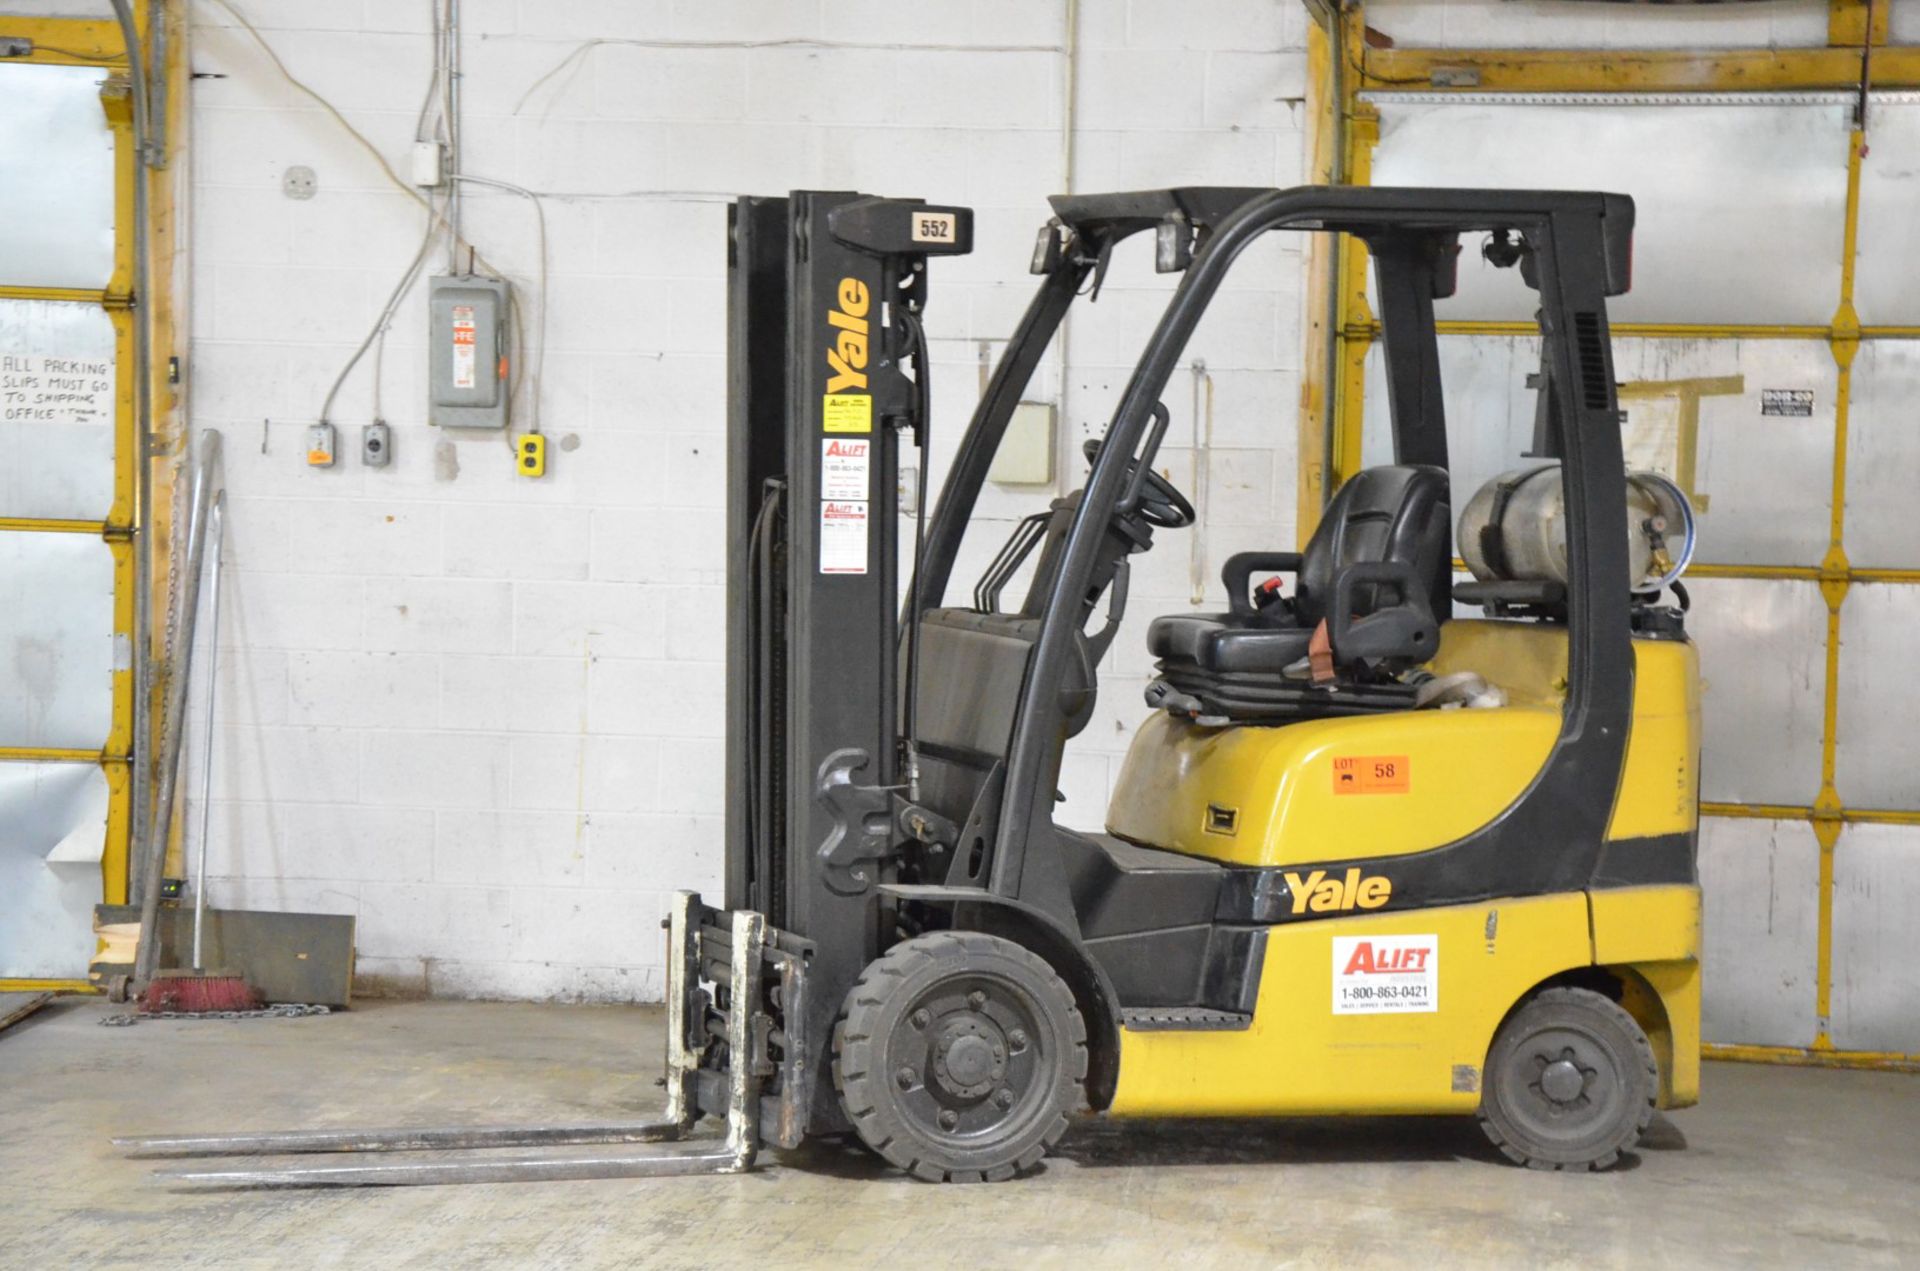 YALE (2014) GLC050VXNVSE083 4,800 LB. CAPACITY LPG FORKLIFT WITH 189" MAX. LIFT HEIGHT, 3-STAGE - Image 2 of 8